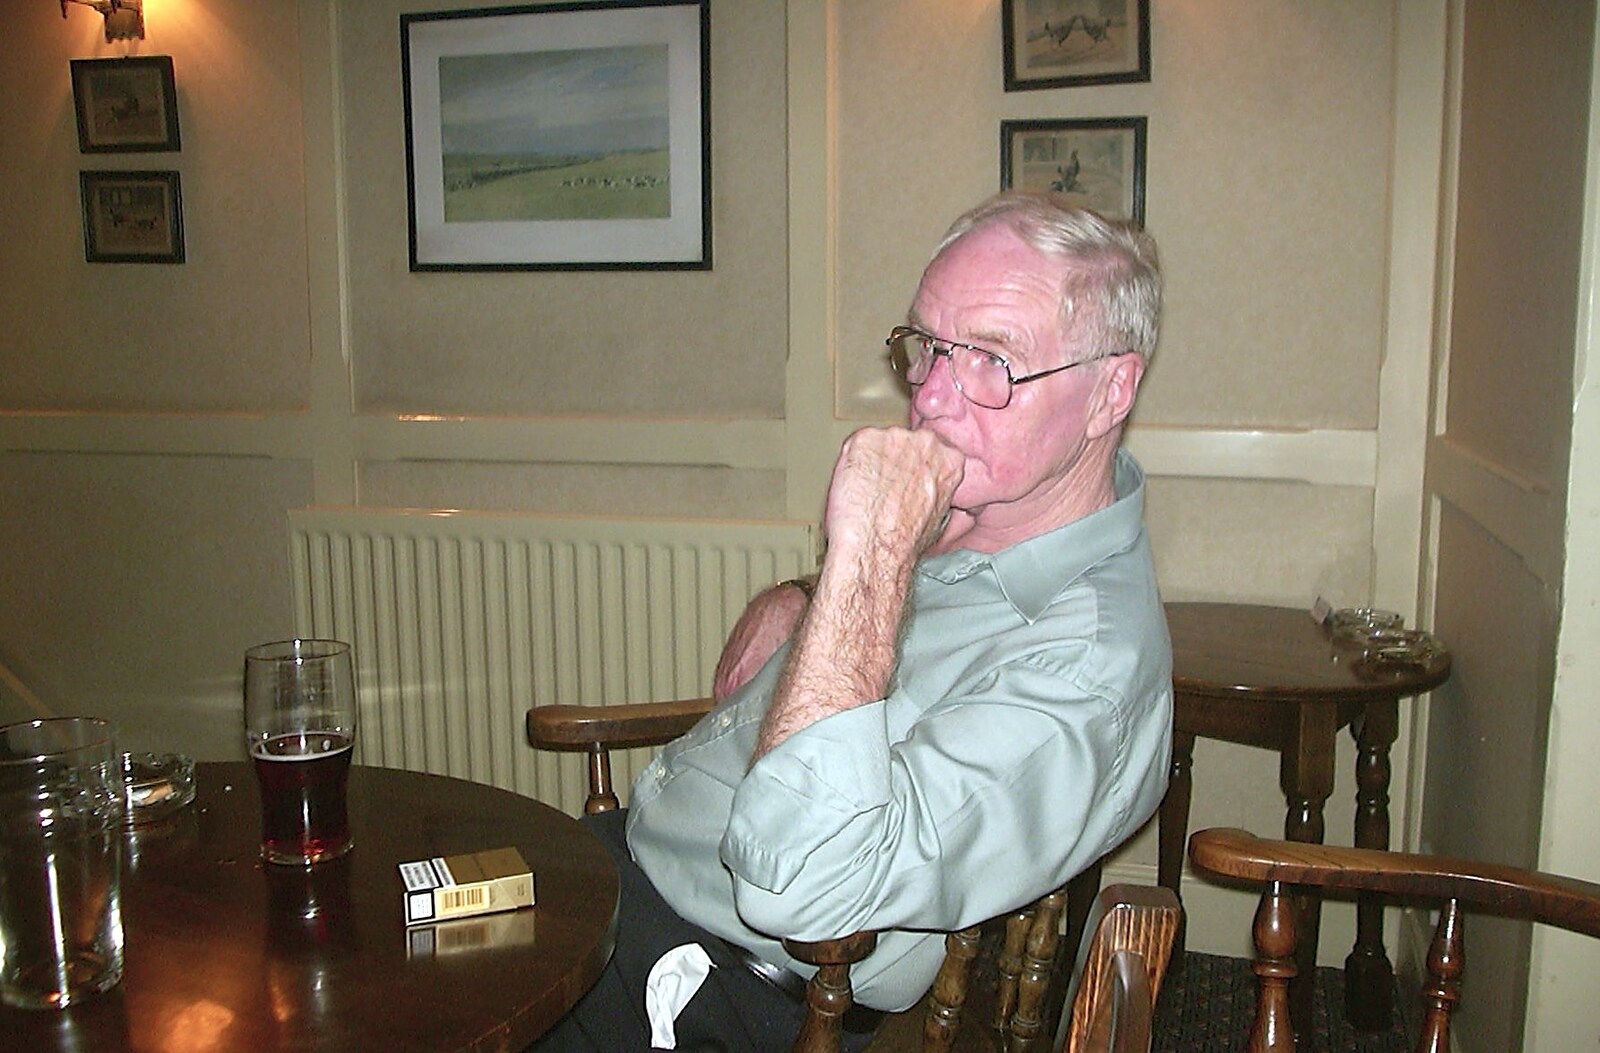 The Old Man from Sis's Nearly-Christmas Wedding, Meavy, Dartmoor - 20th December 2003